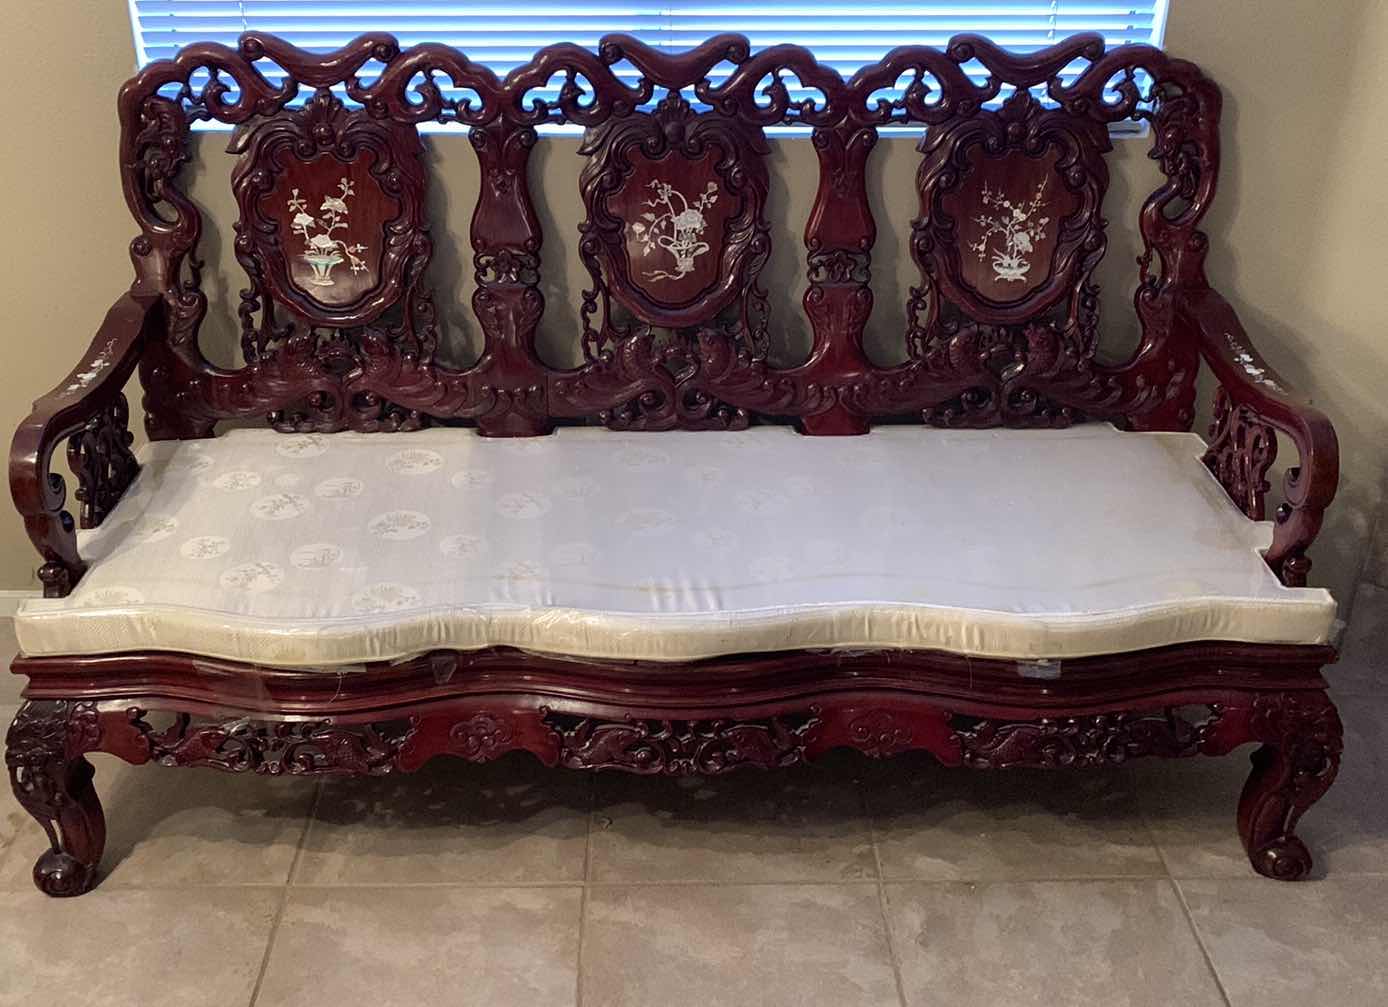 Photo 1 of ORIENTAL ROSE WOOD MOTHER OF PEARL INLAID ROYAL PALACE SOFA COUCH 66” C 26” H 38” $1000